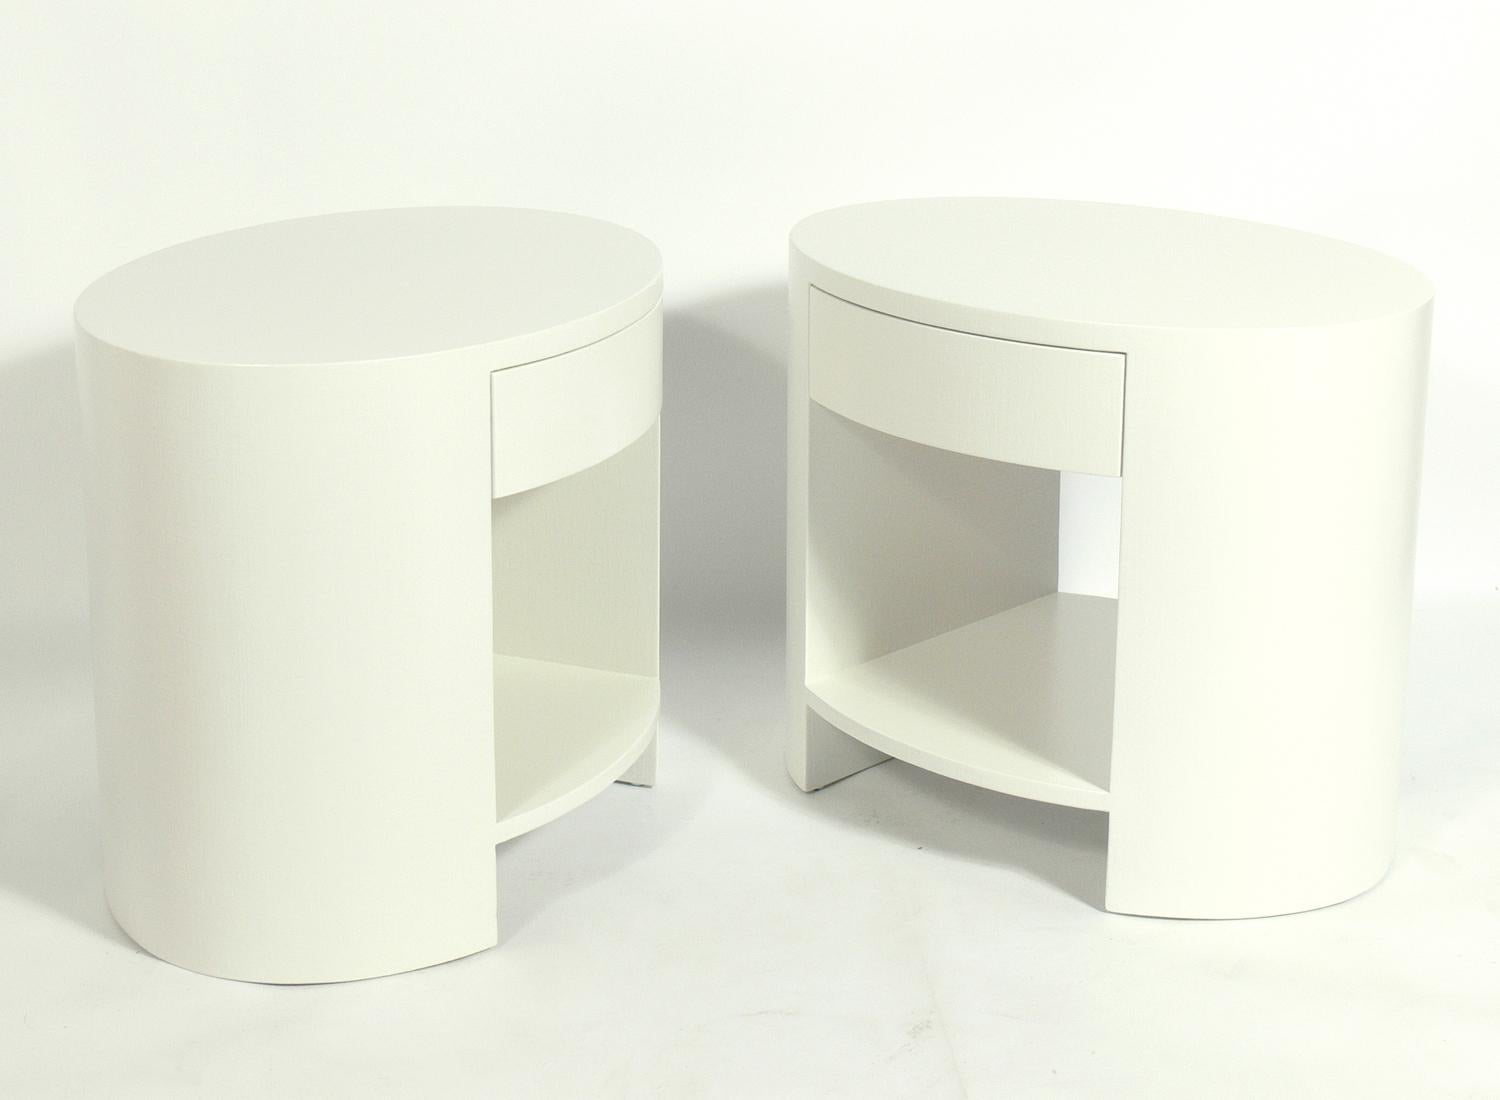 Pair of linen wrapped oval night stands, in the manner of Karl Springer, American, circa 1970s. They have been refinished in Benjamin Moore white dove, a Classic white with subtle gray tones. They are a versatile size and can be used as side or end